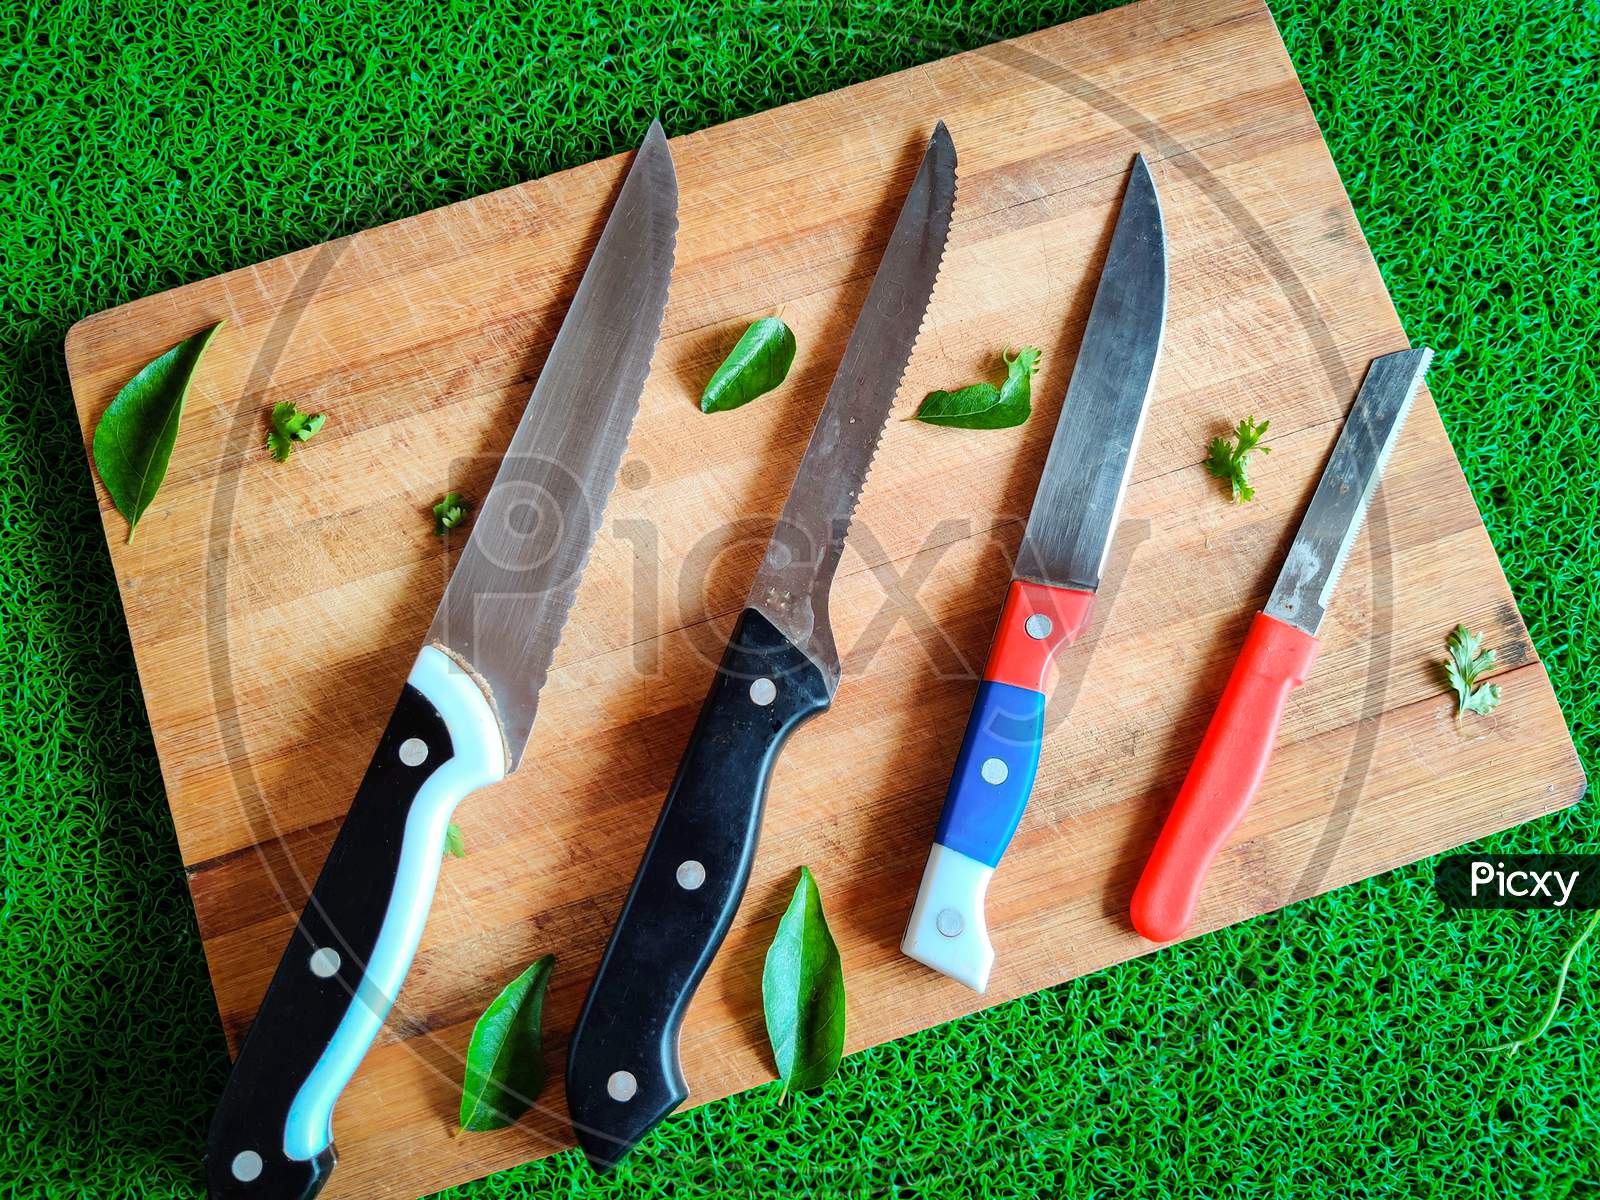 Four Colored Different Sizes Of Knives Kept On Chopping Board. With Curry Leaves And Coriander Leaves Spread Around